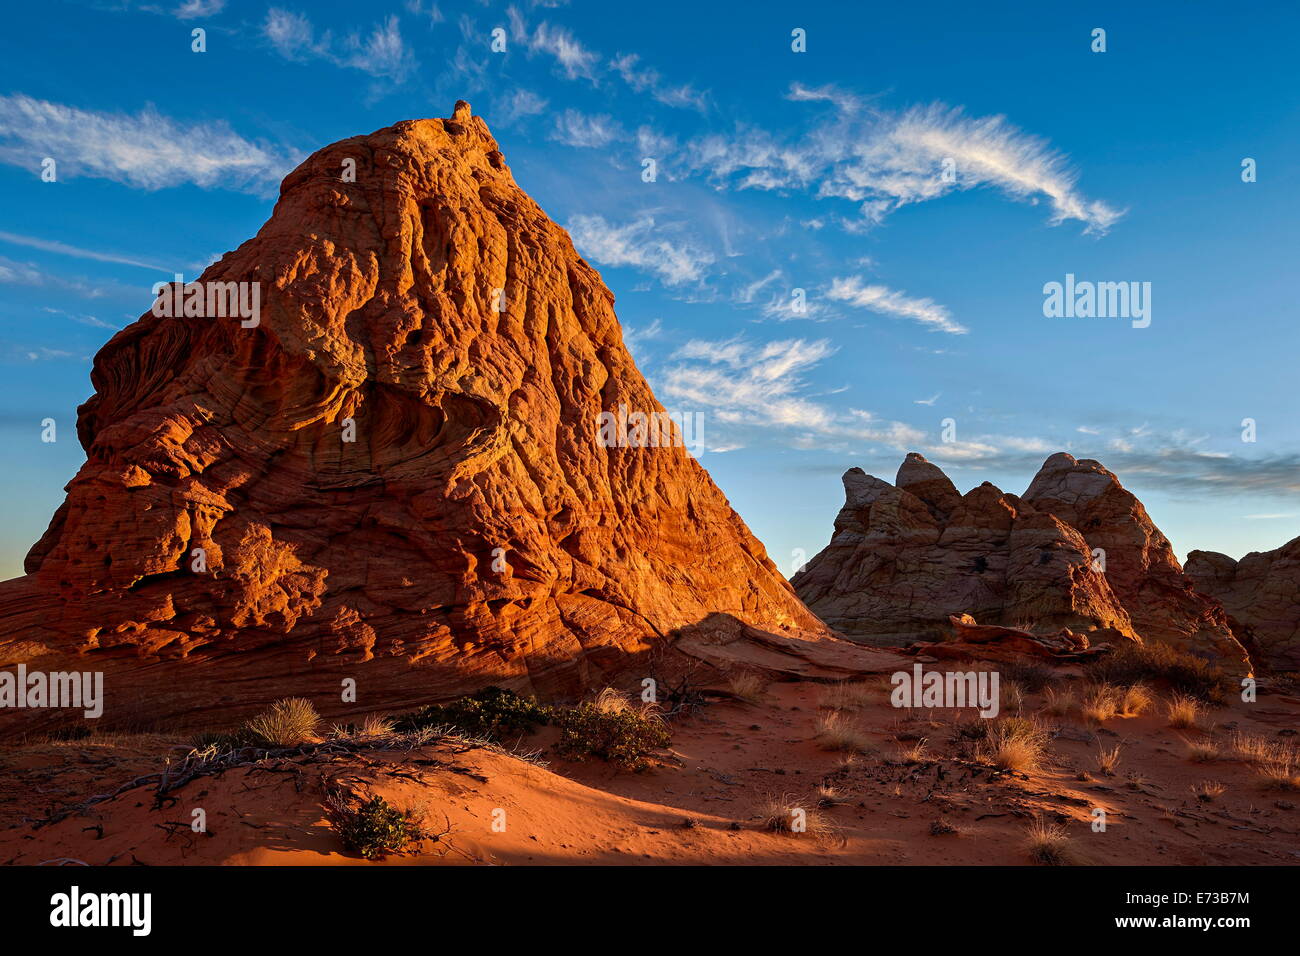 Butte at first light, Coyote Buttes Wilderness, Vermilion Cliffs National Monument, Arizona, United States of America Stock Photo